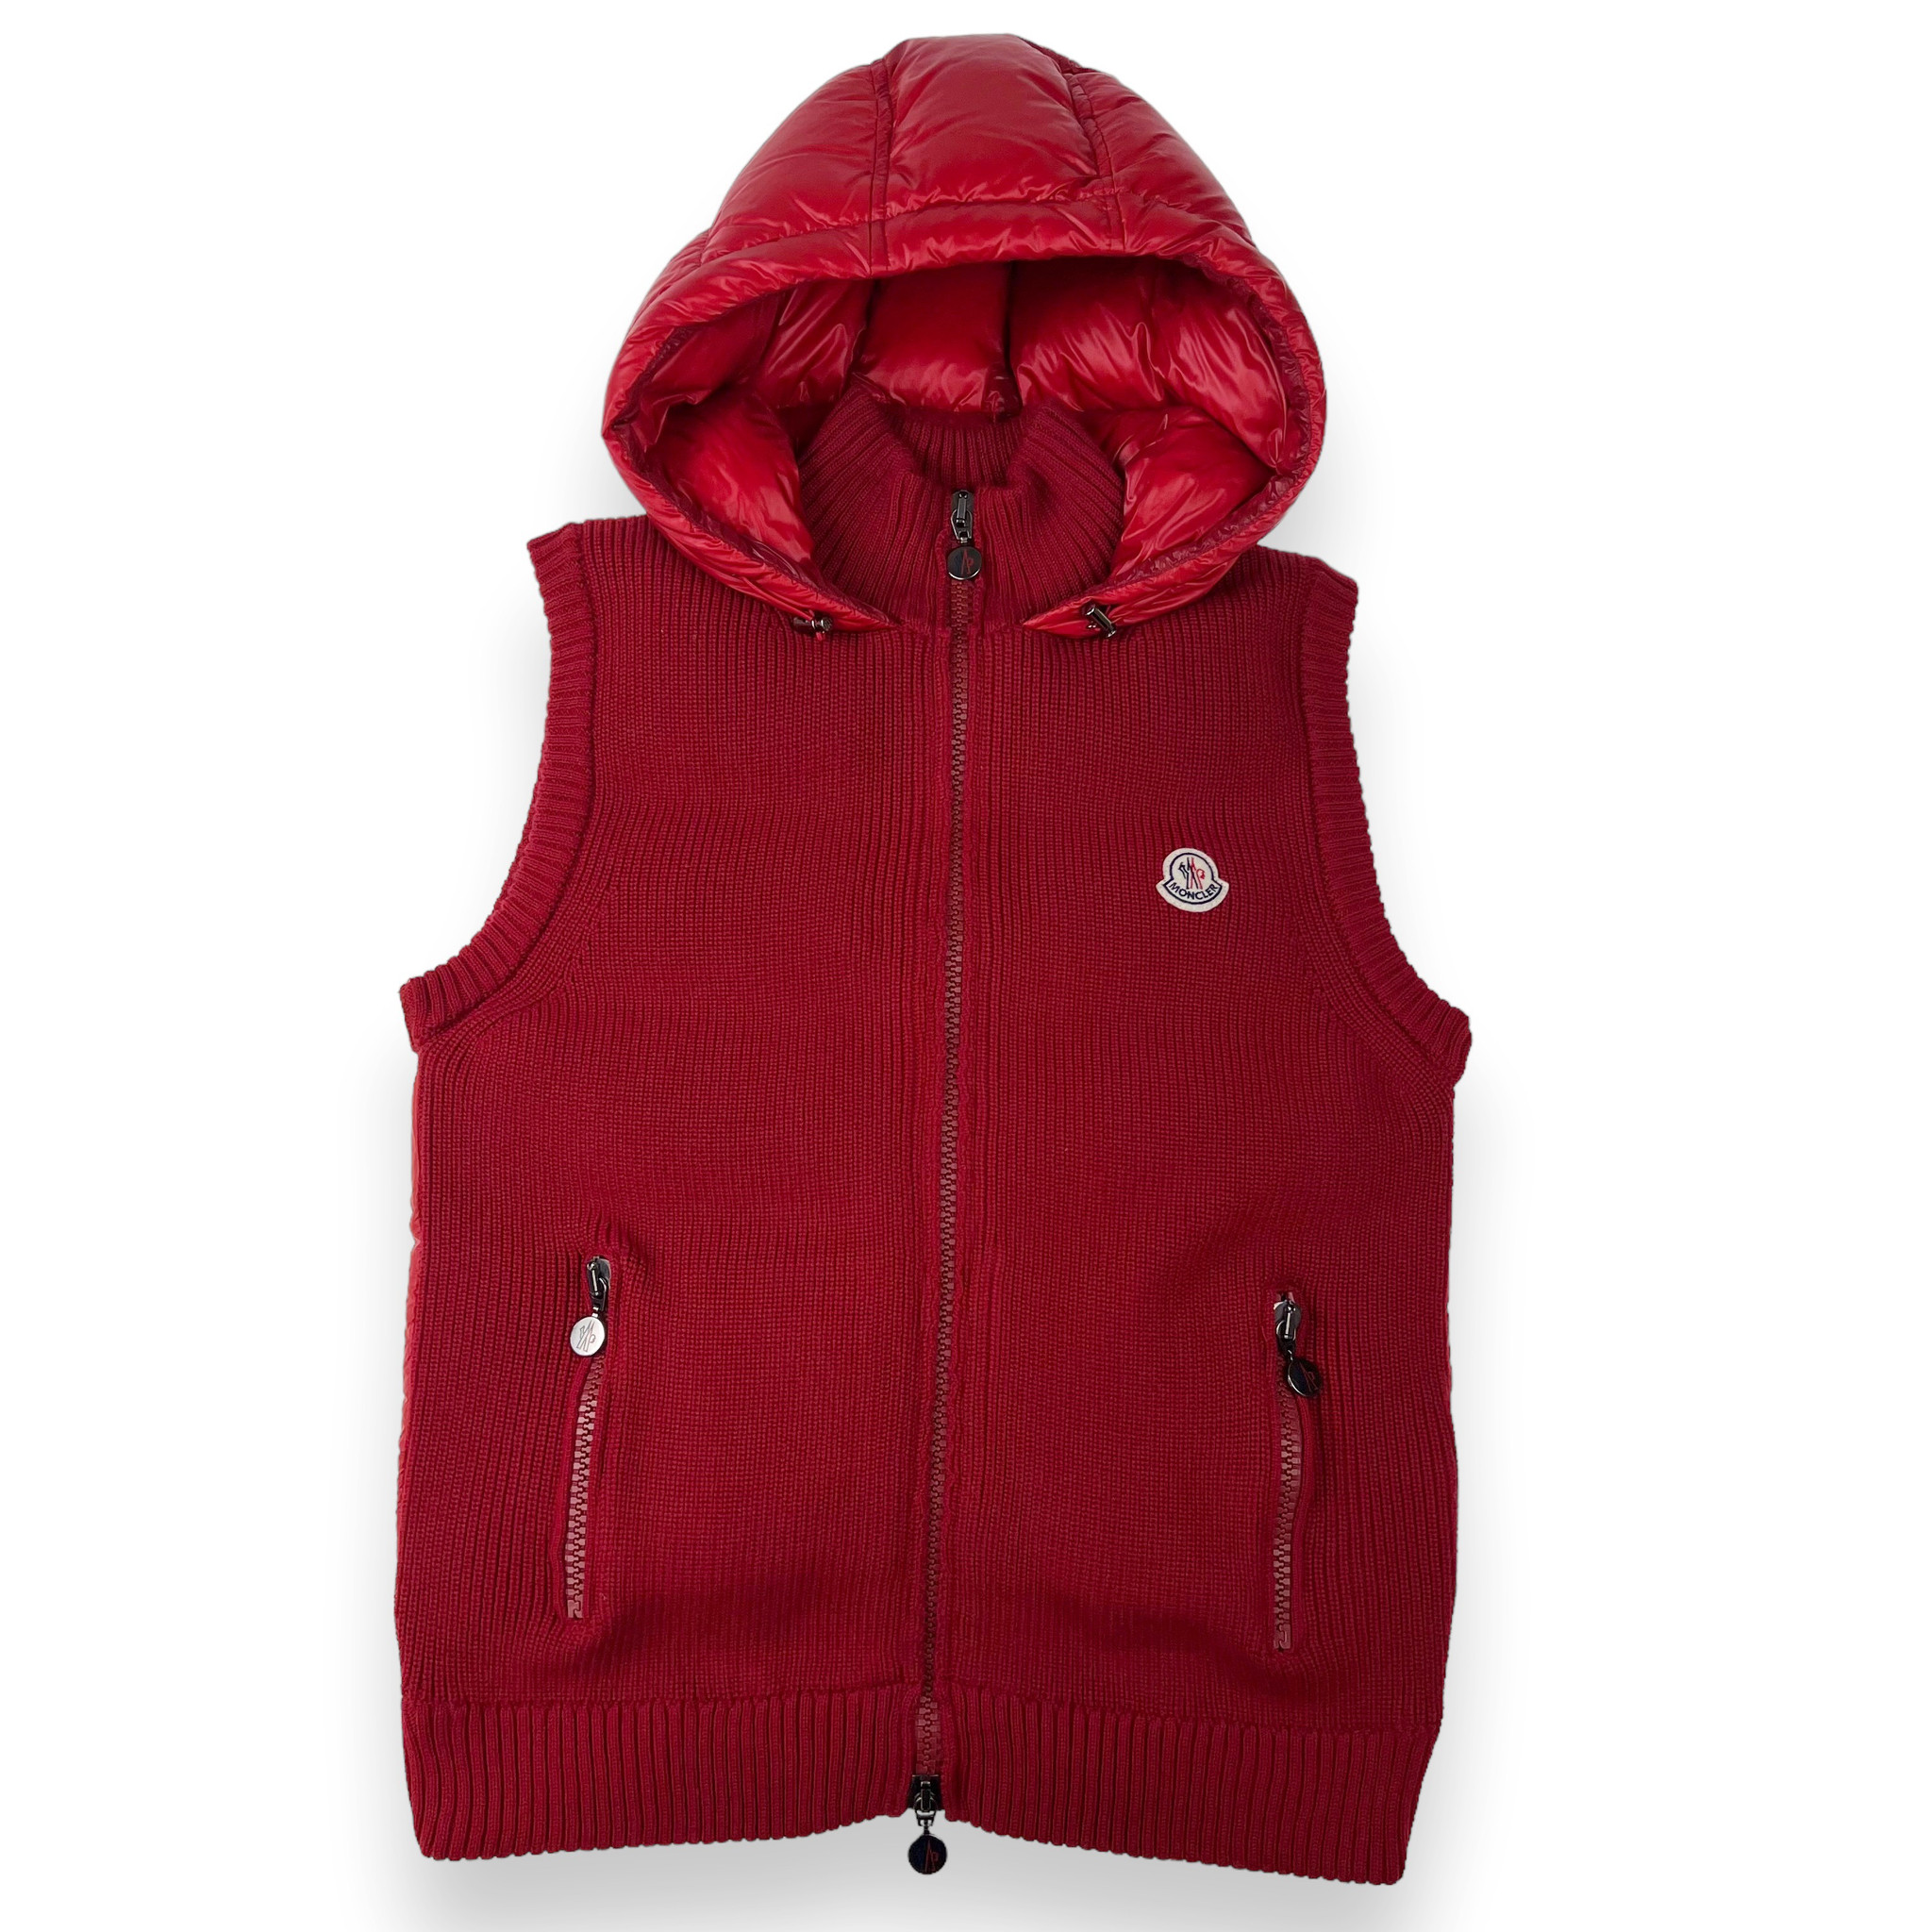 Moncler Red Maglione Tricot Gilet - Oliver's Archive